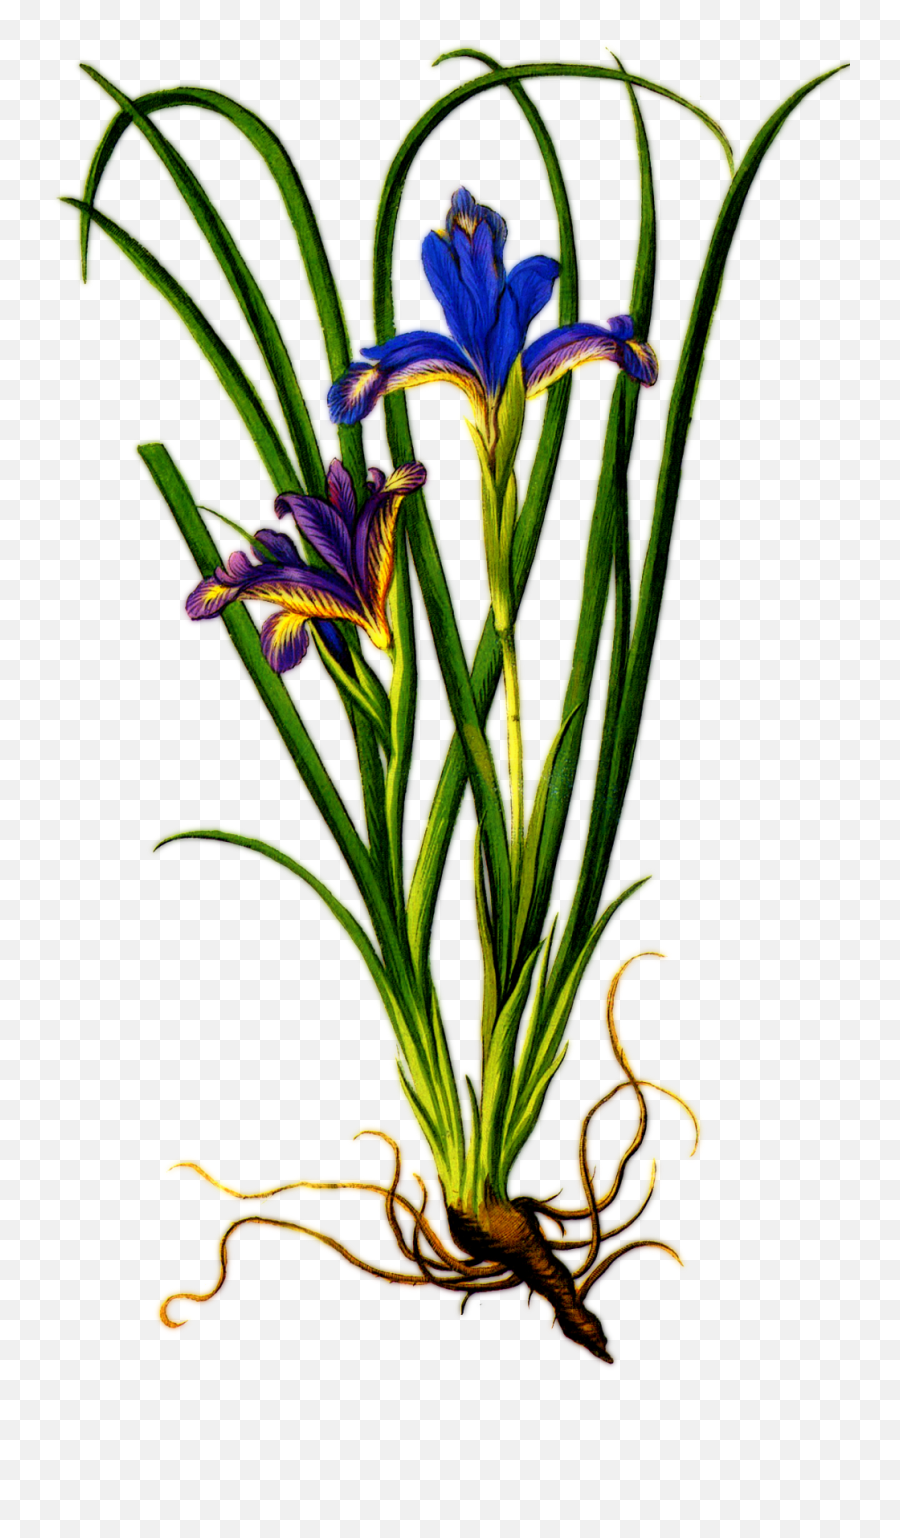 Beautiful Iris Plant Clipart Free Image - Iris Flower With Roots Emoji,Plant, Emotions, Clipart